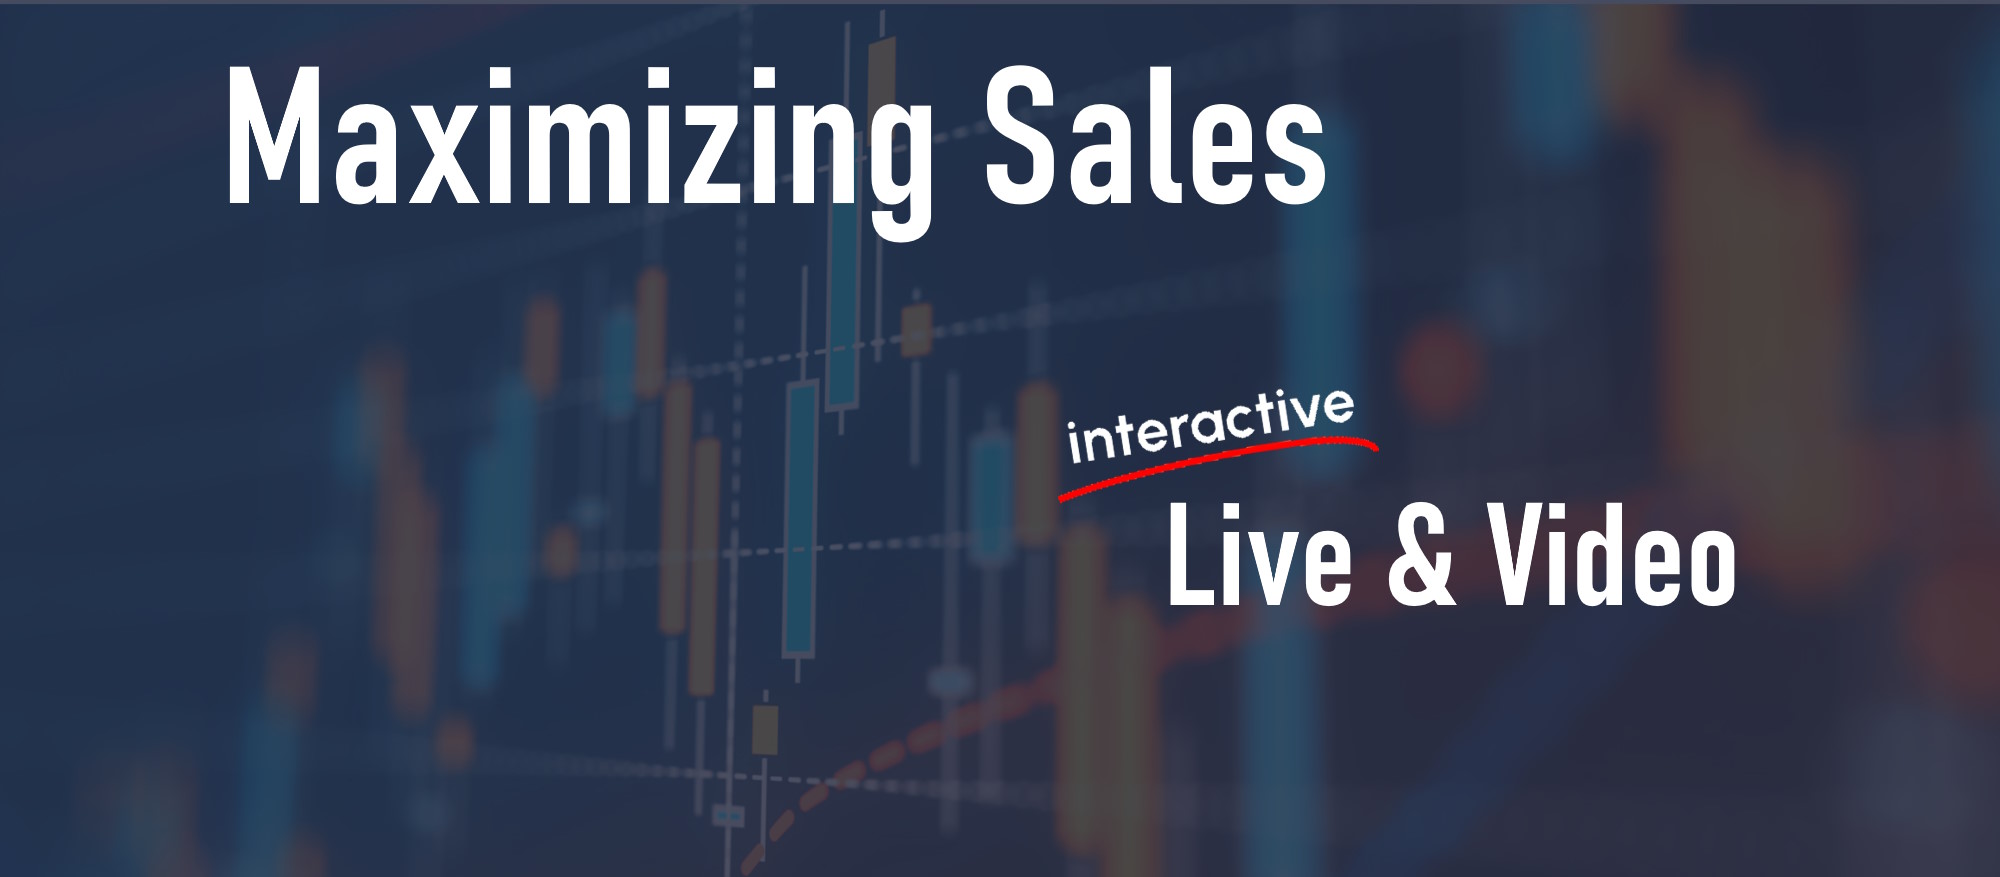 Maximizing sales with interactive live & video2